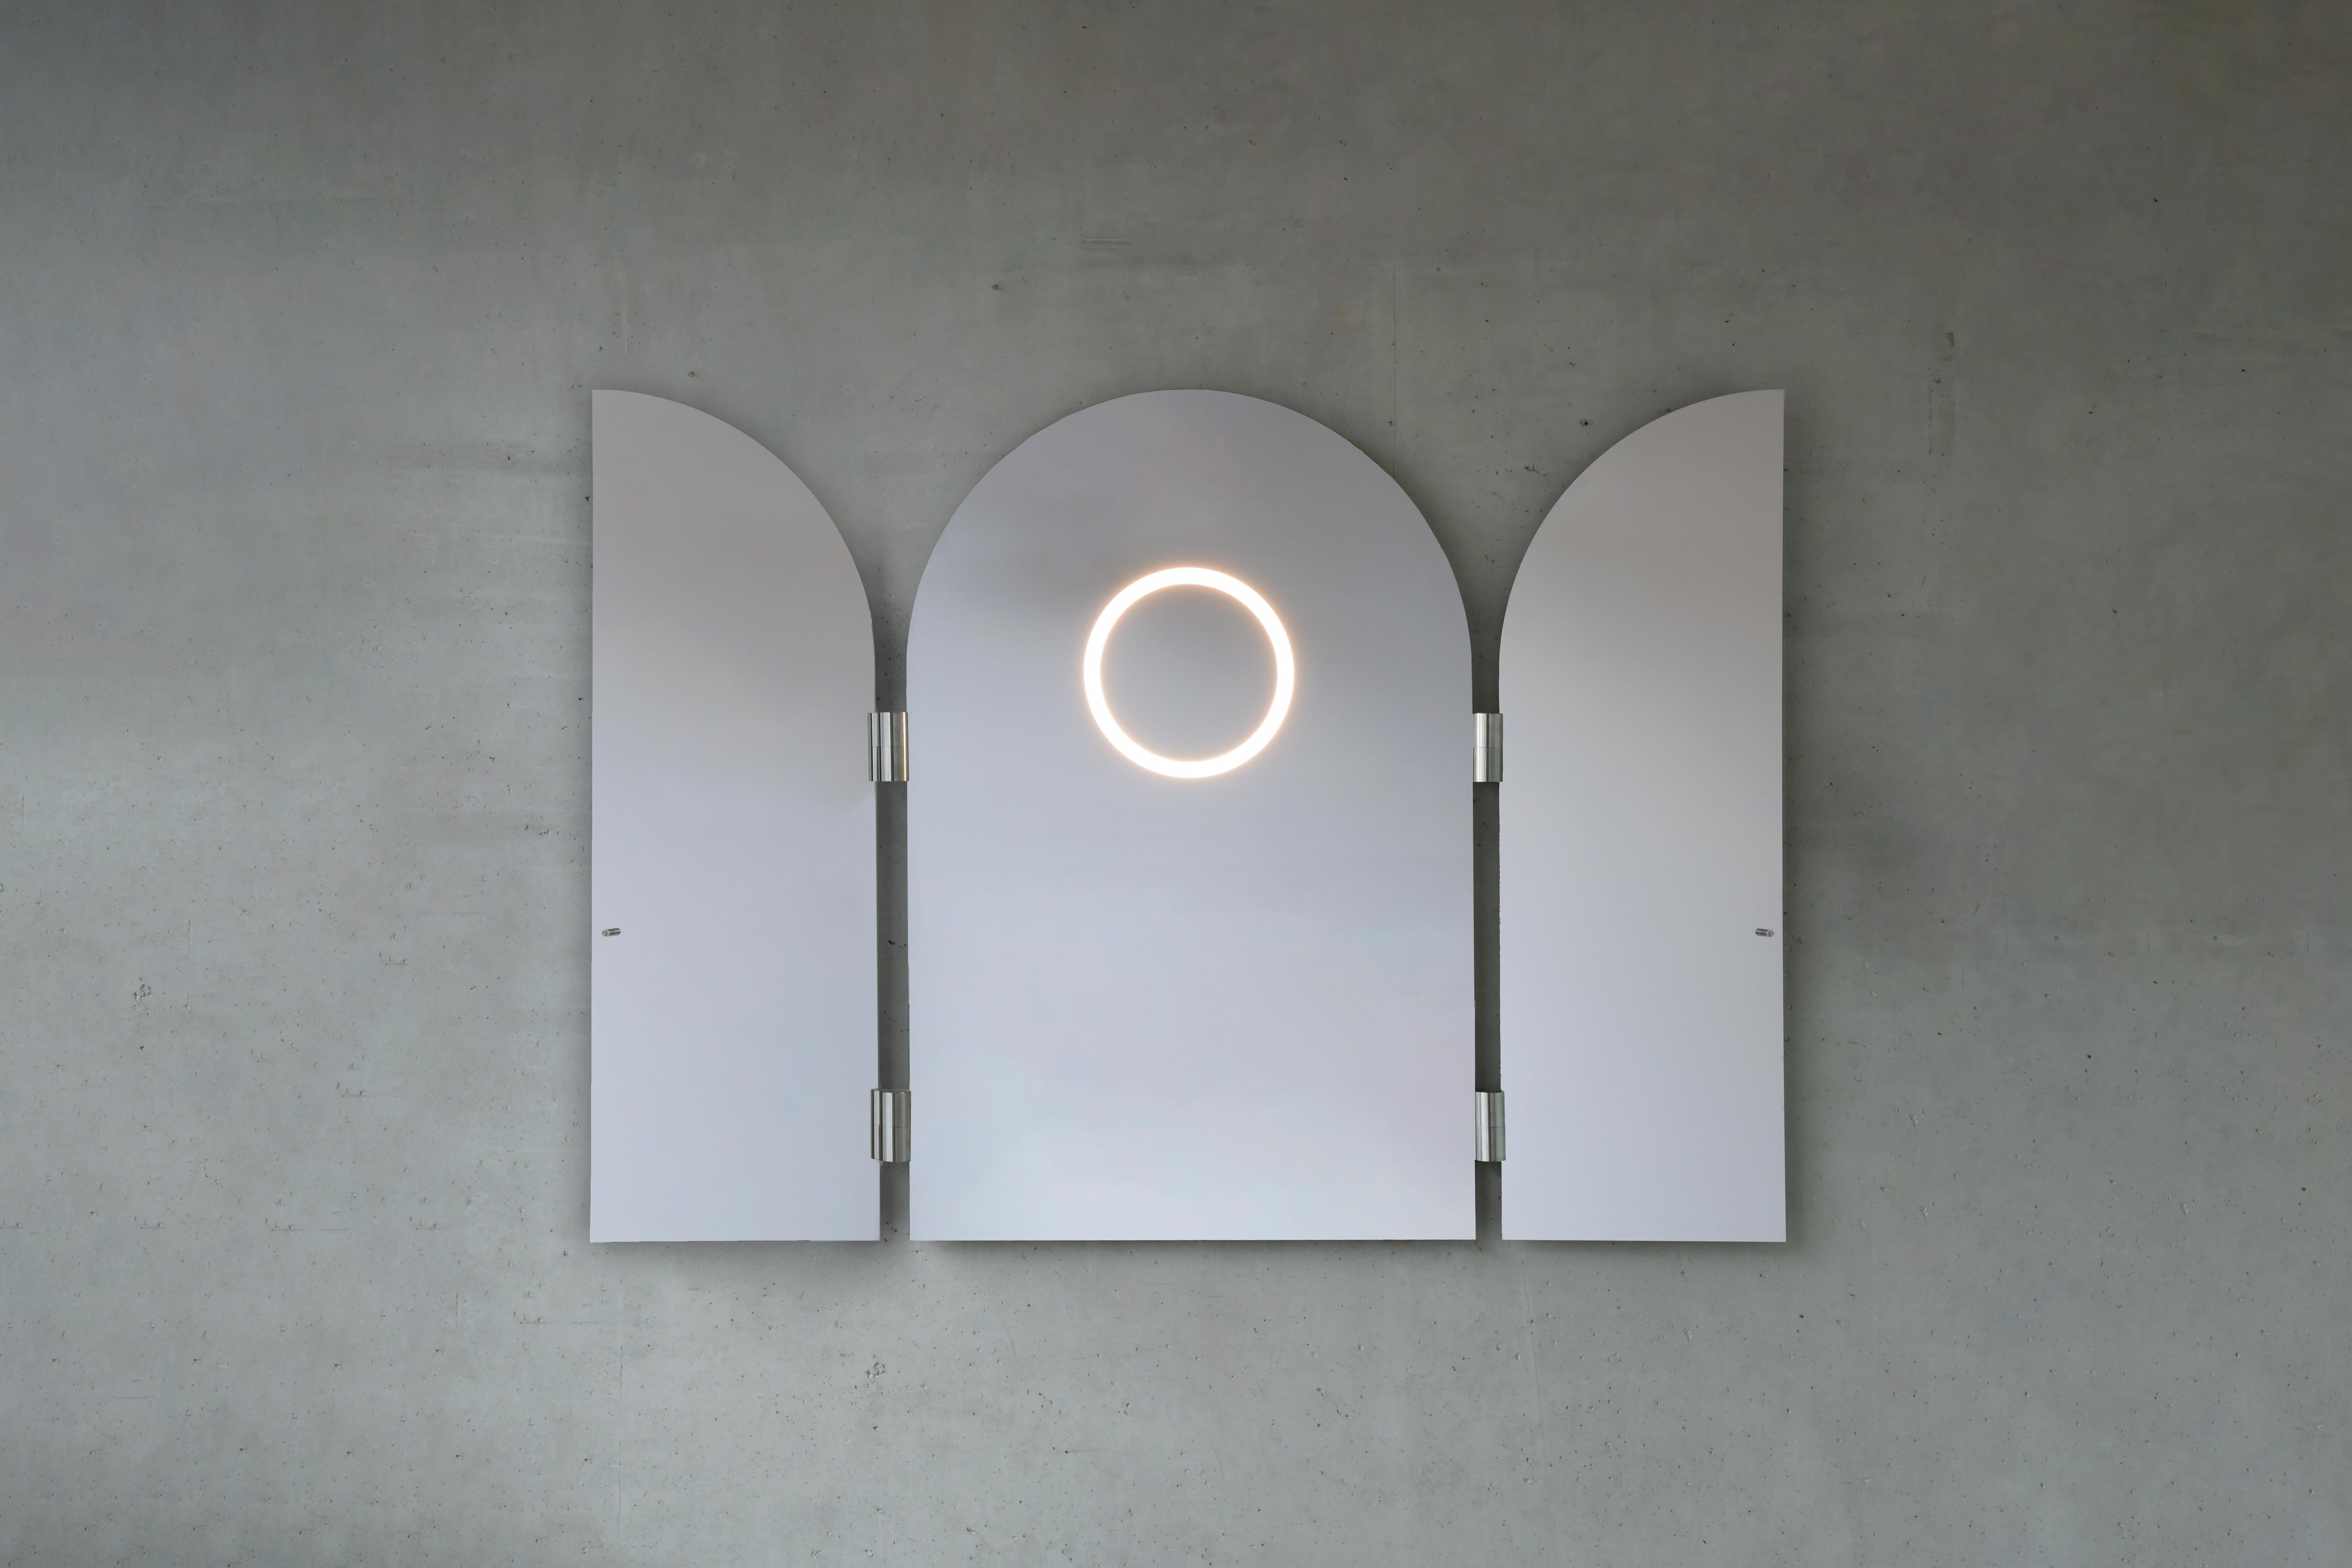 Monumental triptychs Mirror - Jesse Visser
Dimensions: 165 x 230 x 5 cm
Polished stainless steel, dimmable led light

Jesse Visser presents imposing monumental limited editions: triptychs – of which the largest is 1.65 meters high and 2.30